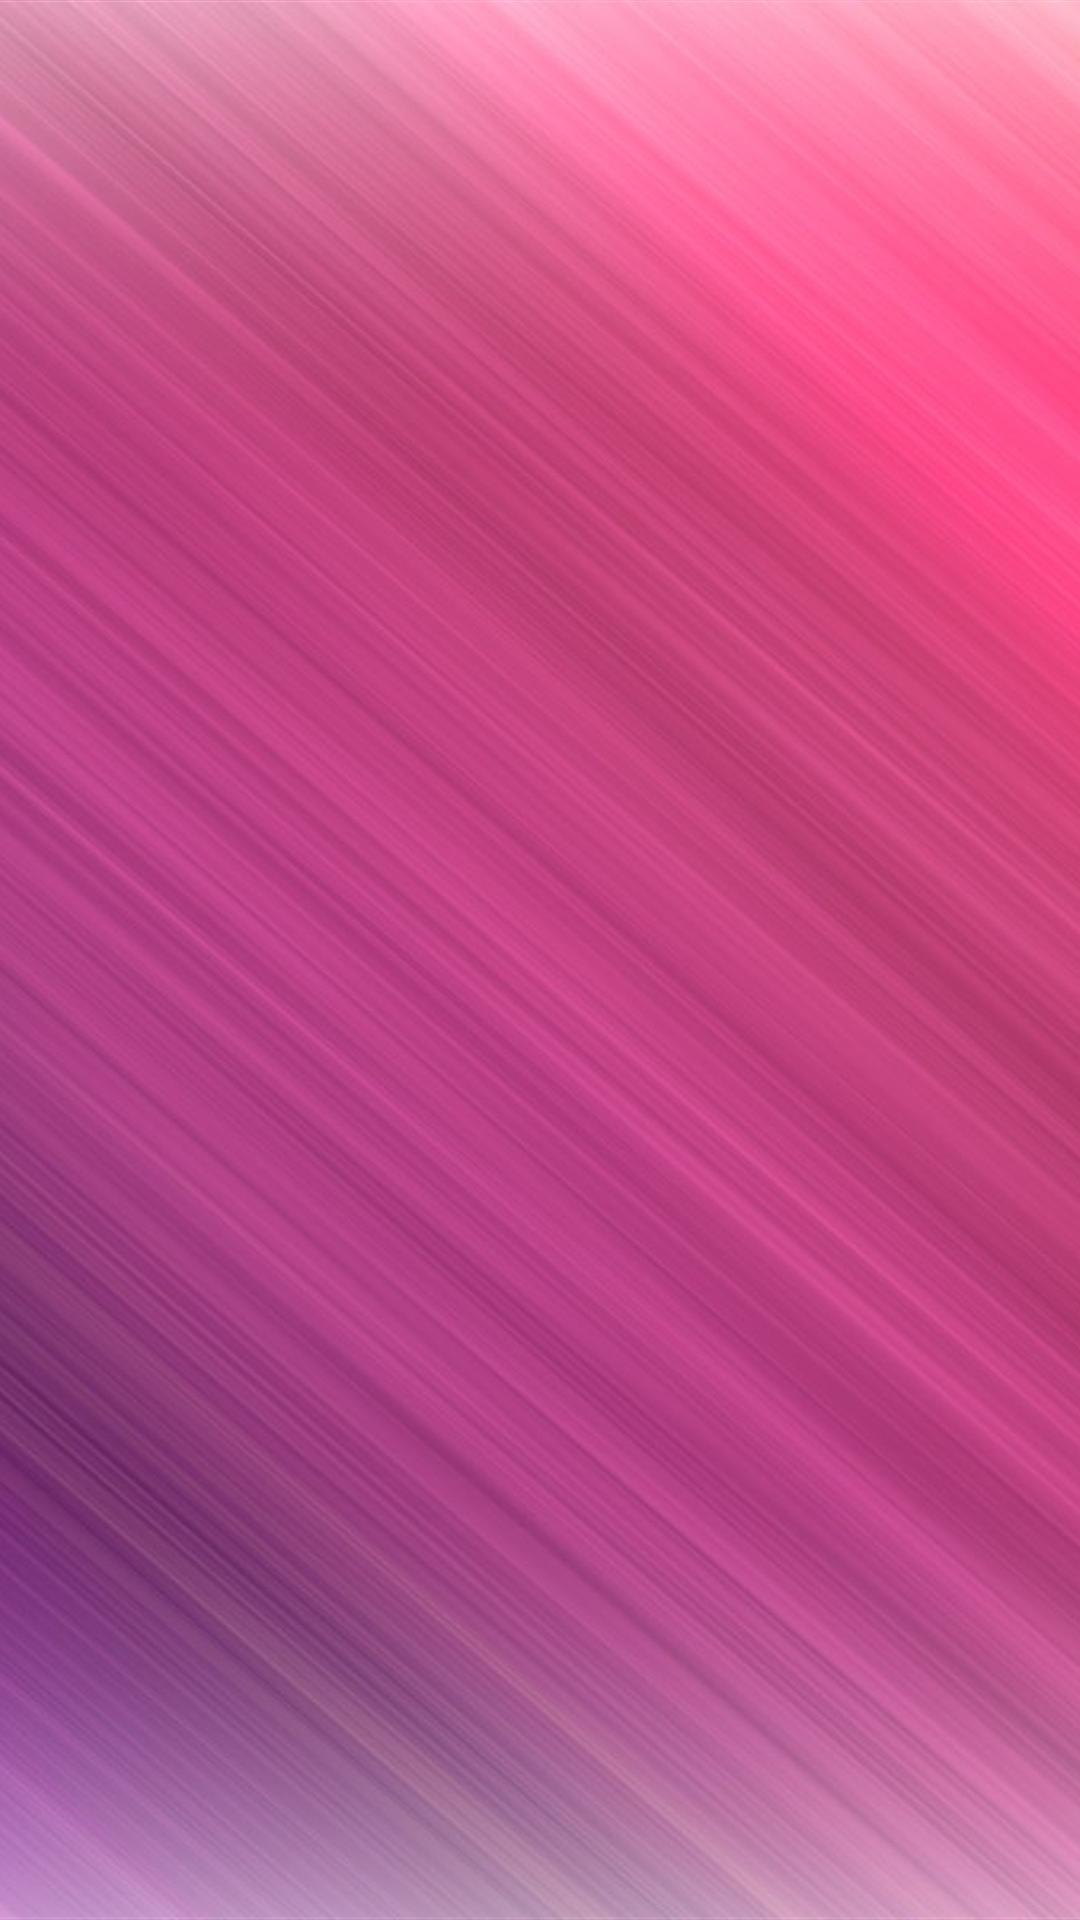 Free Download Cool Pink Iphone Background.